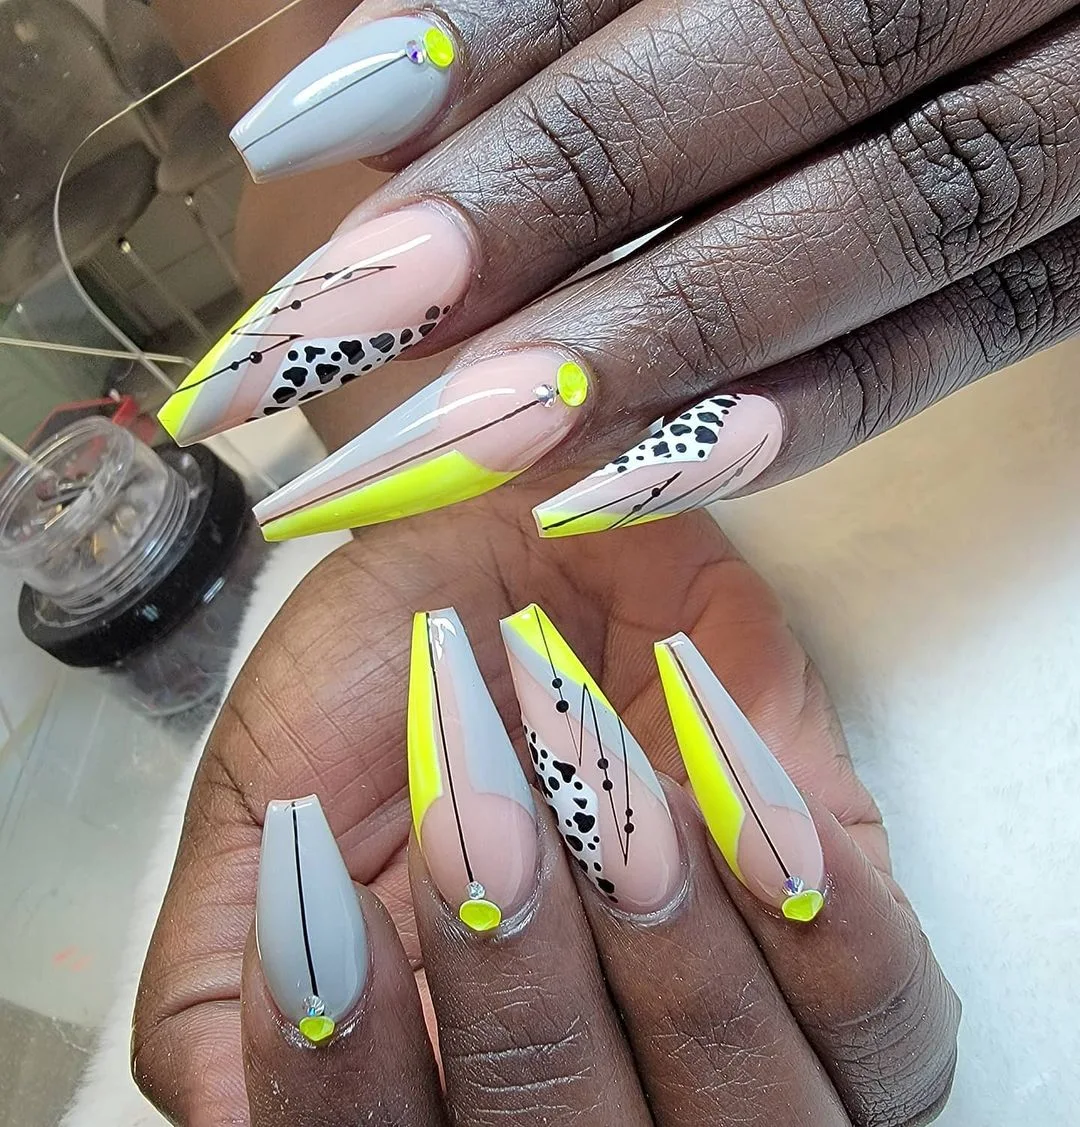 50 Bright Color Nail Art Designs for Summer. | Melody Jacob